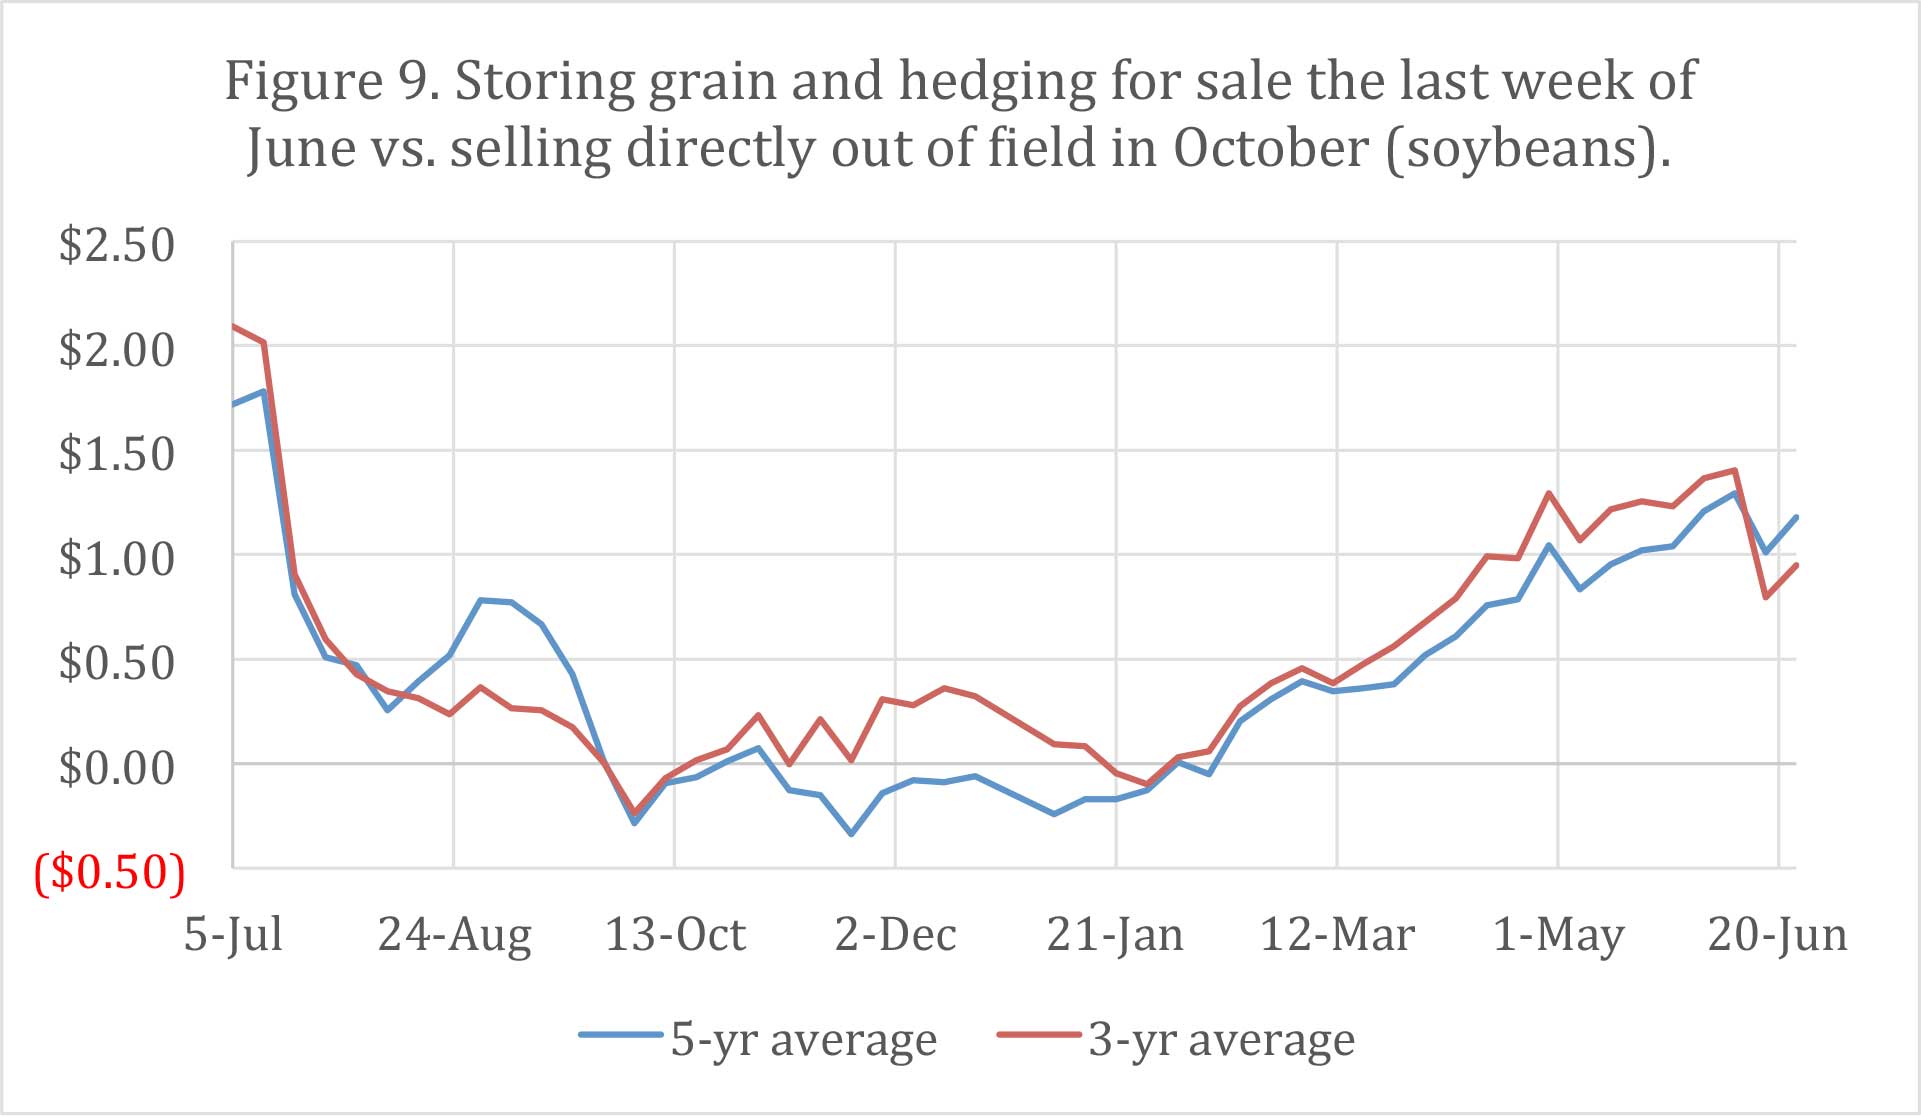 Figure 9. Storing grain and hedging for sale the last week of June vs. selling directly out of Hield in October (soybeans).